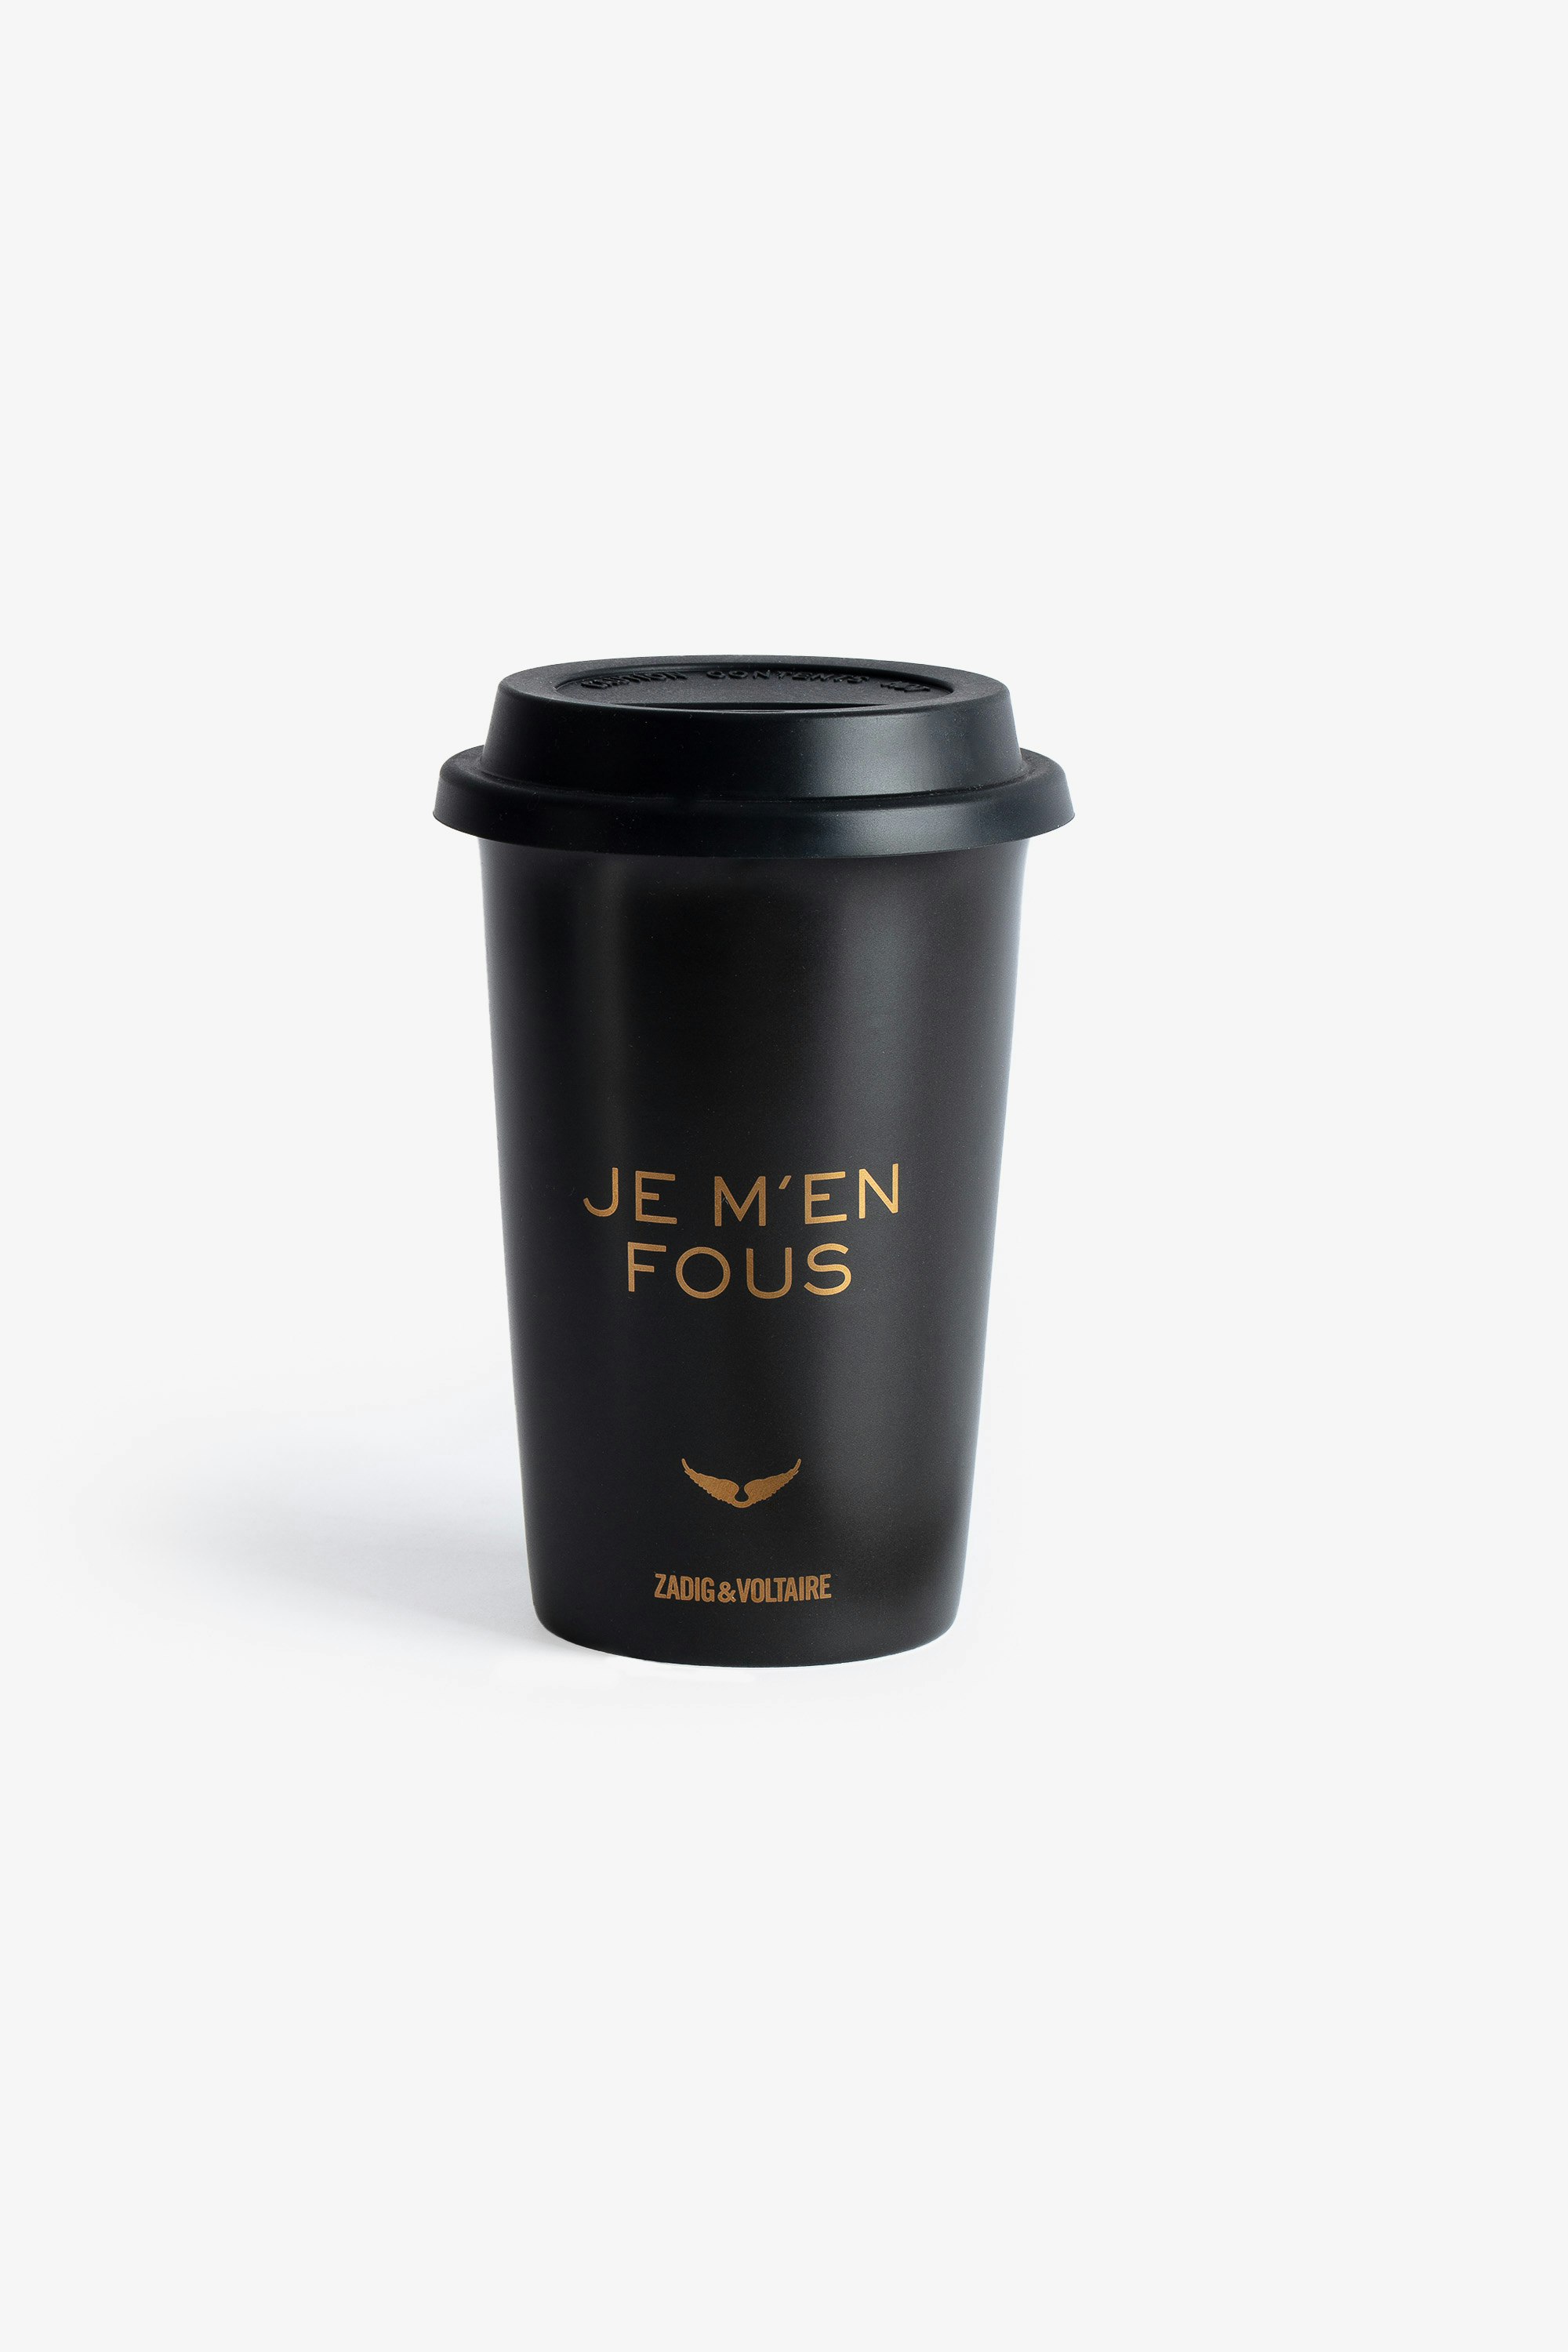 Cup of Joy Mug - Voltaire Vice black ceramic mug with lid decorated with slogans, the wings motif and Zadig&Voltaire signature.